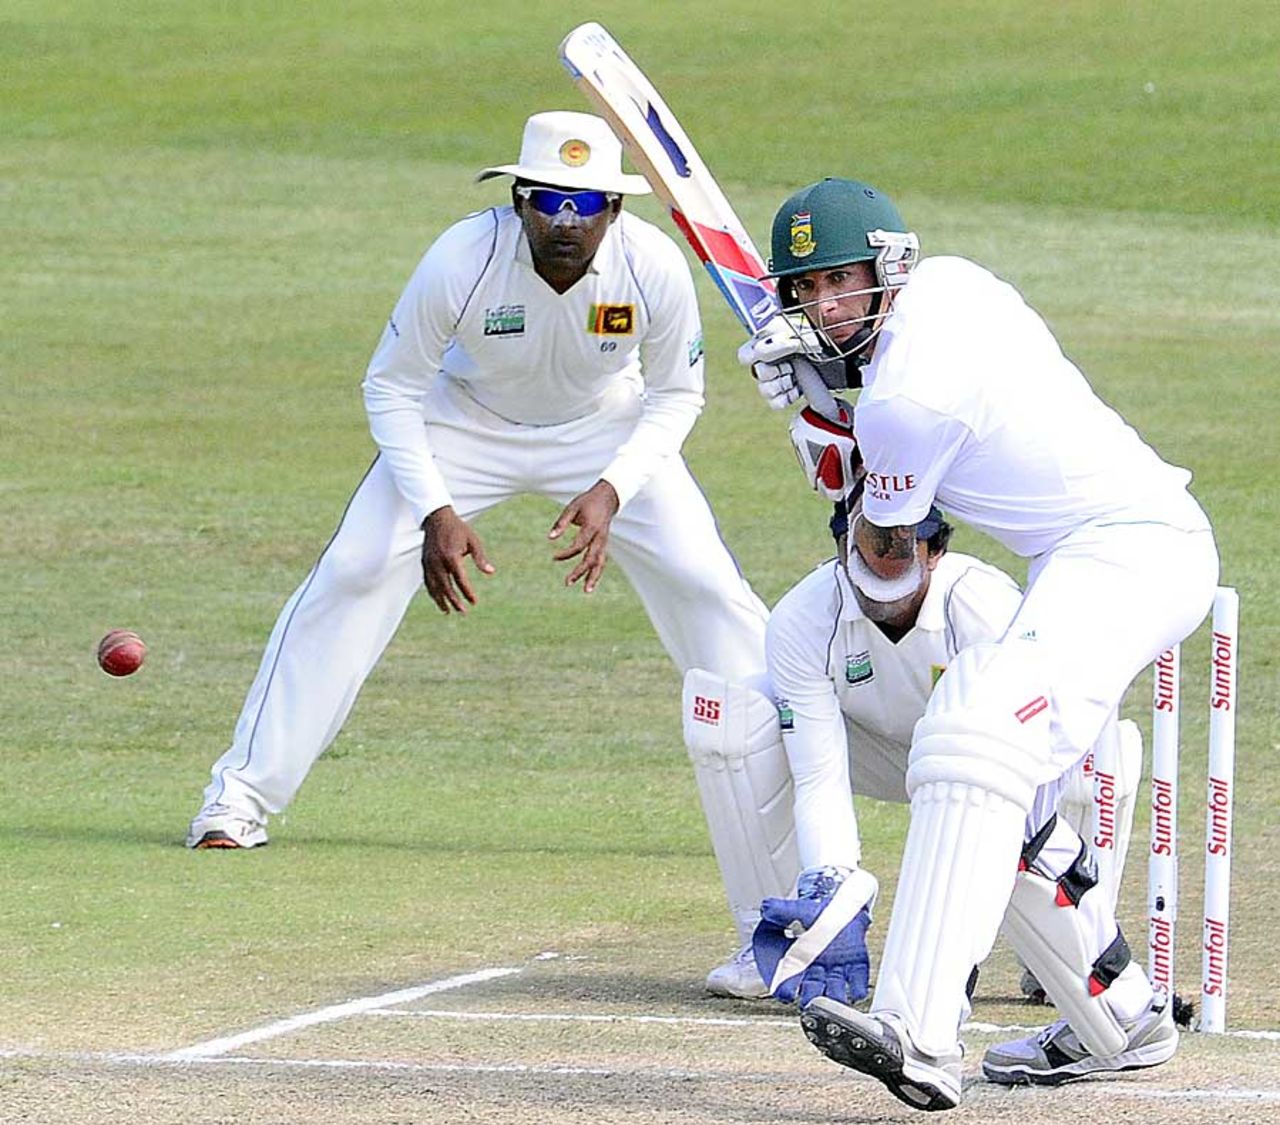 Dale Steyn shapes up to dispatch one, South Africa v Sri Lanka, 2nd Test, Durban, 4th day, December 29, 2011